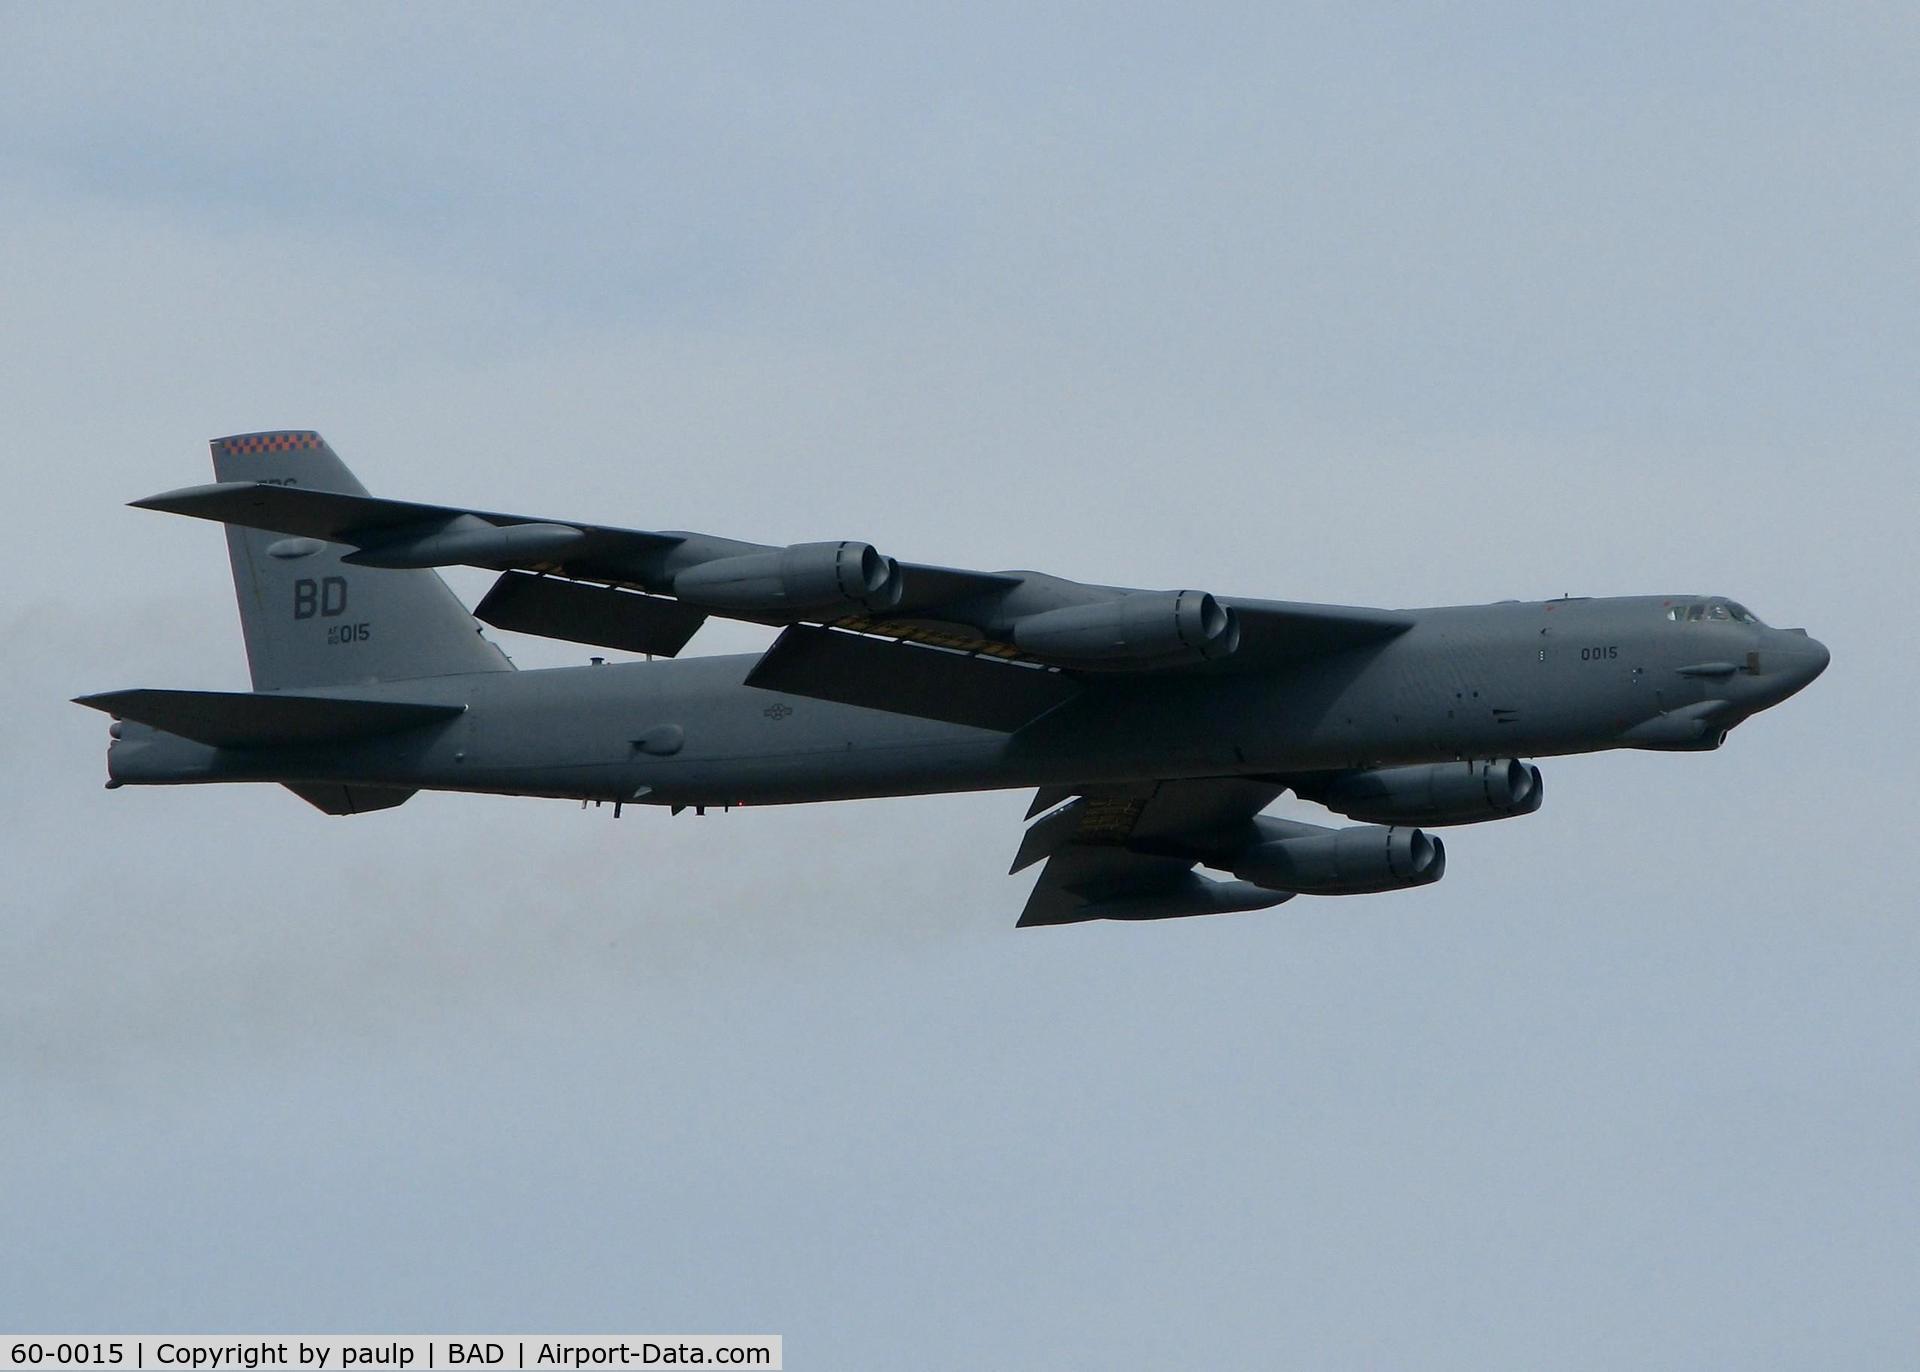 60-0015, 1960 Boeing B-52H Stratofortress C/N 464380, Off of Rwy 15 at Barksdale Air Force Base.